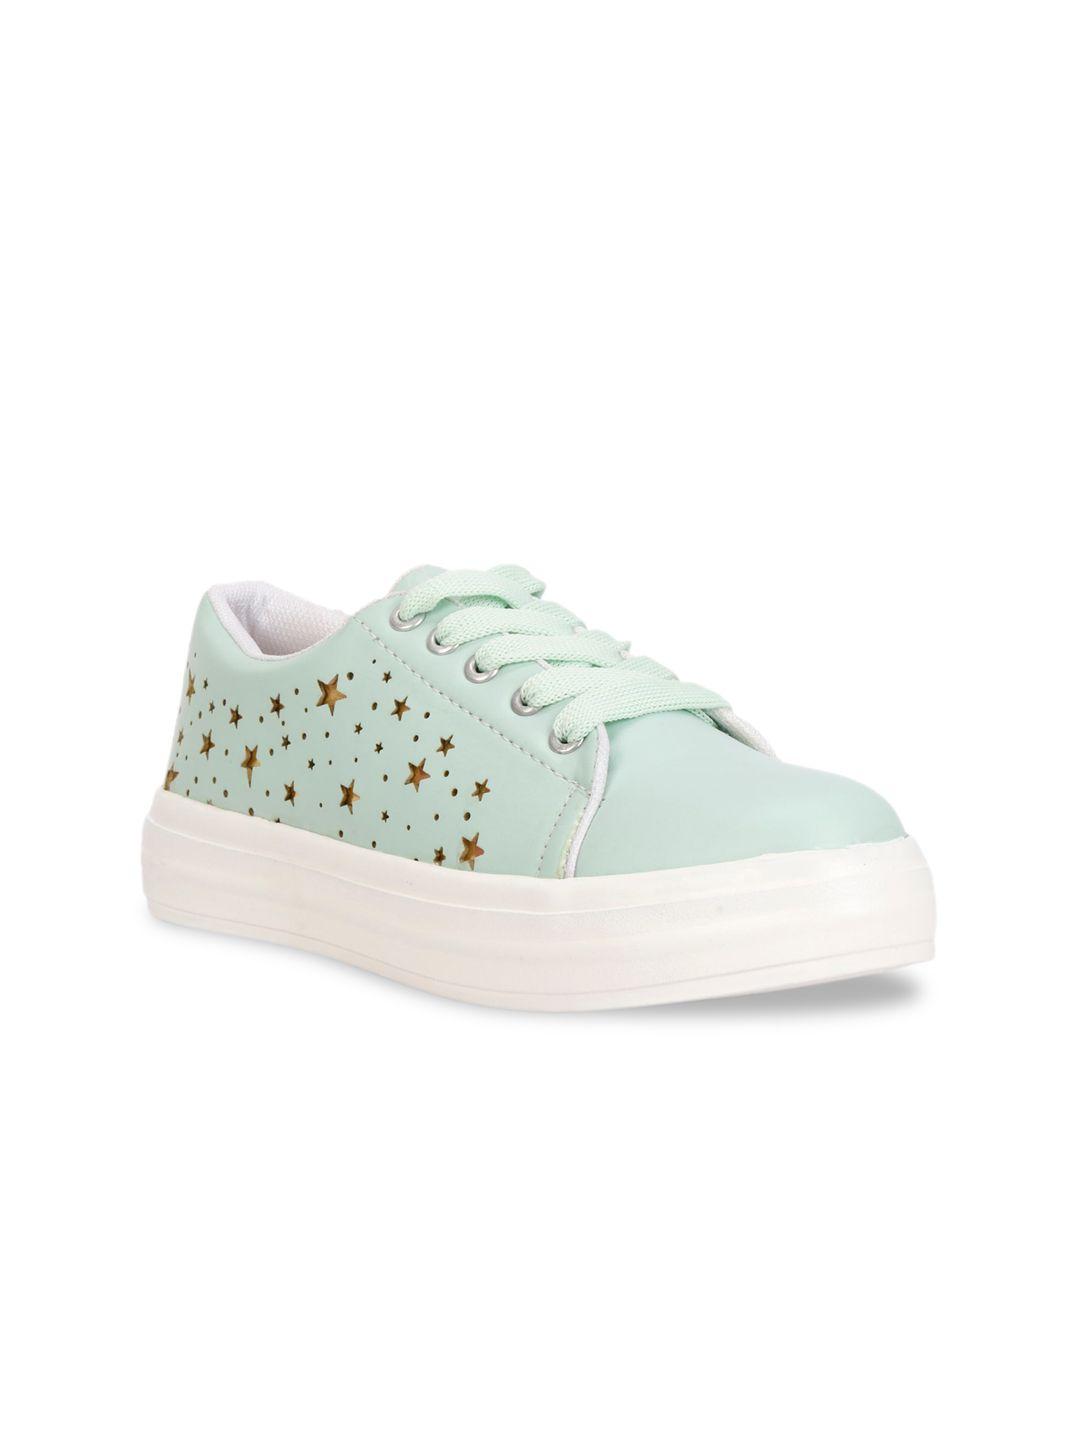 denill-women-turquoise-blue-printed-sneakers